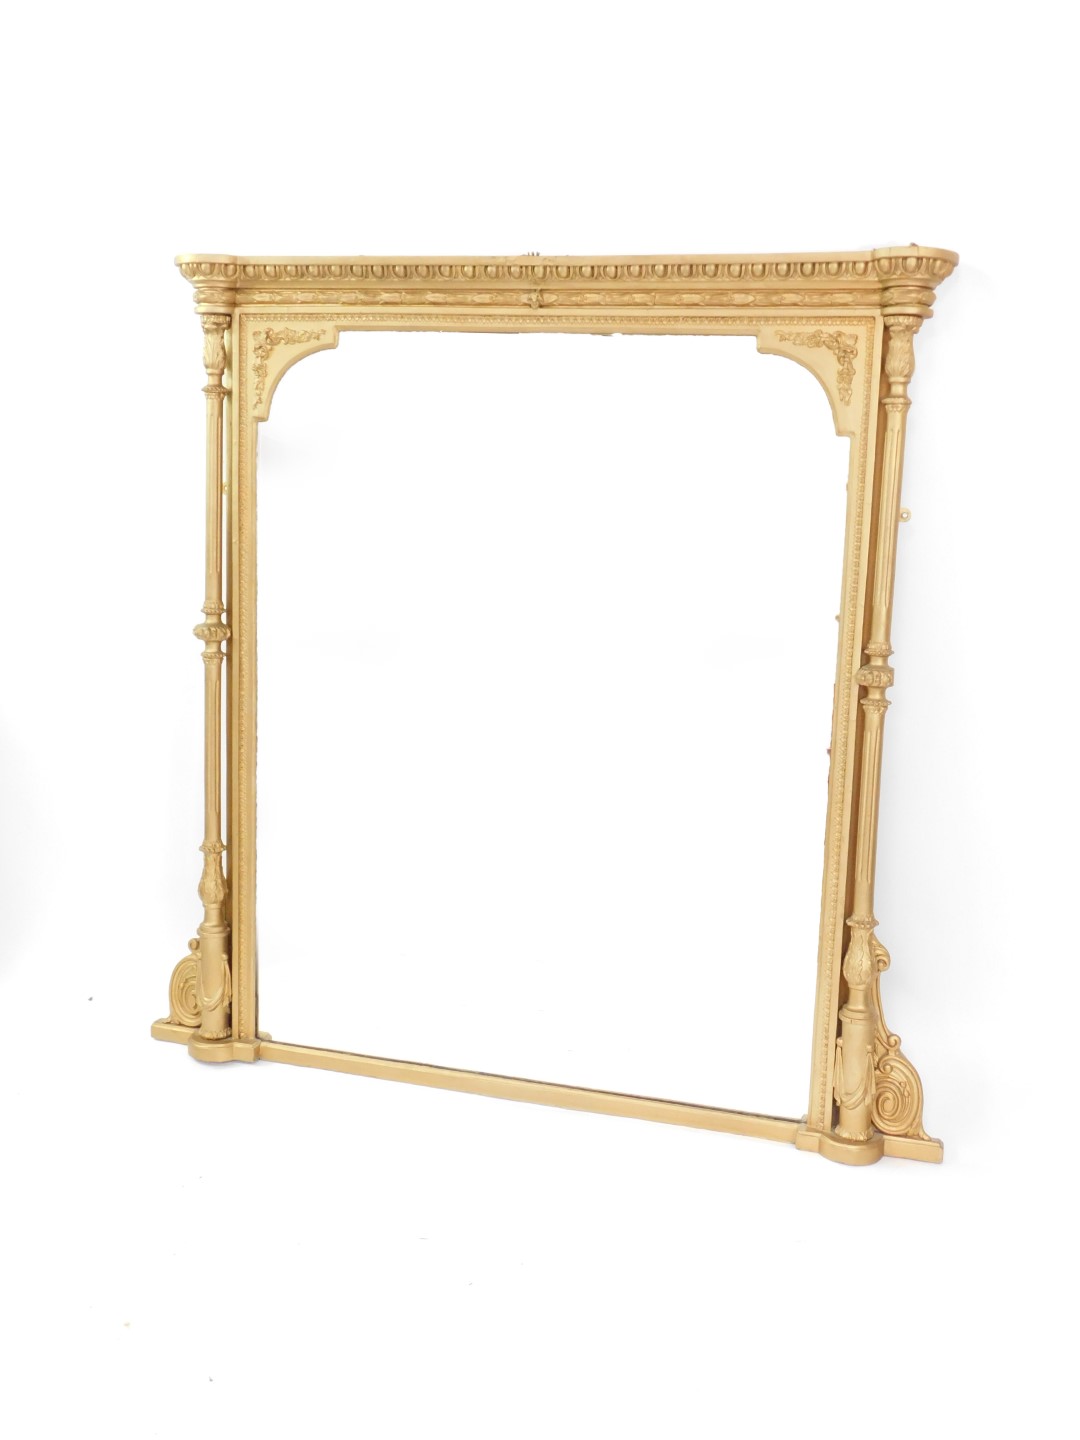 Withdrawn pre-sale by executors- A 19thC gilt wood overmantel mirror